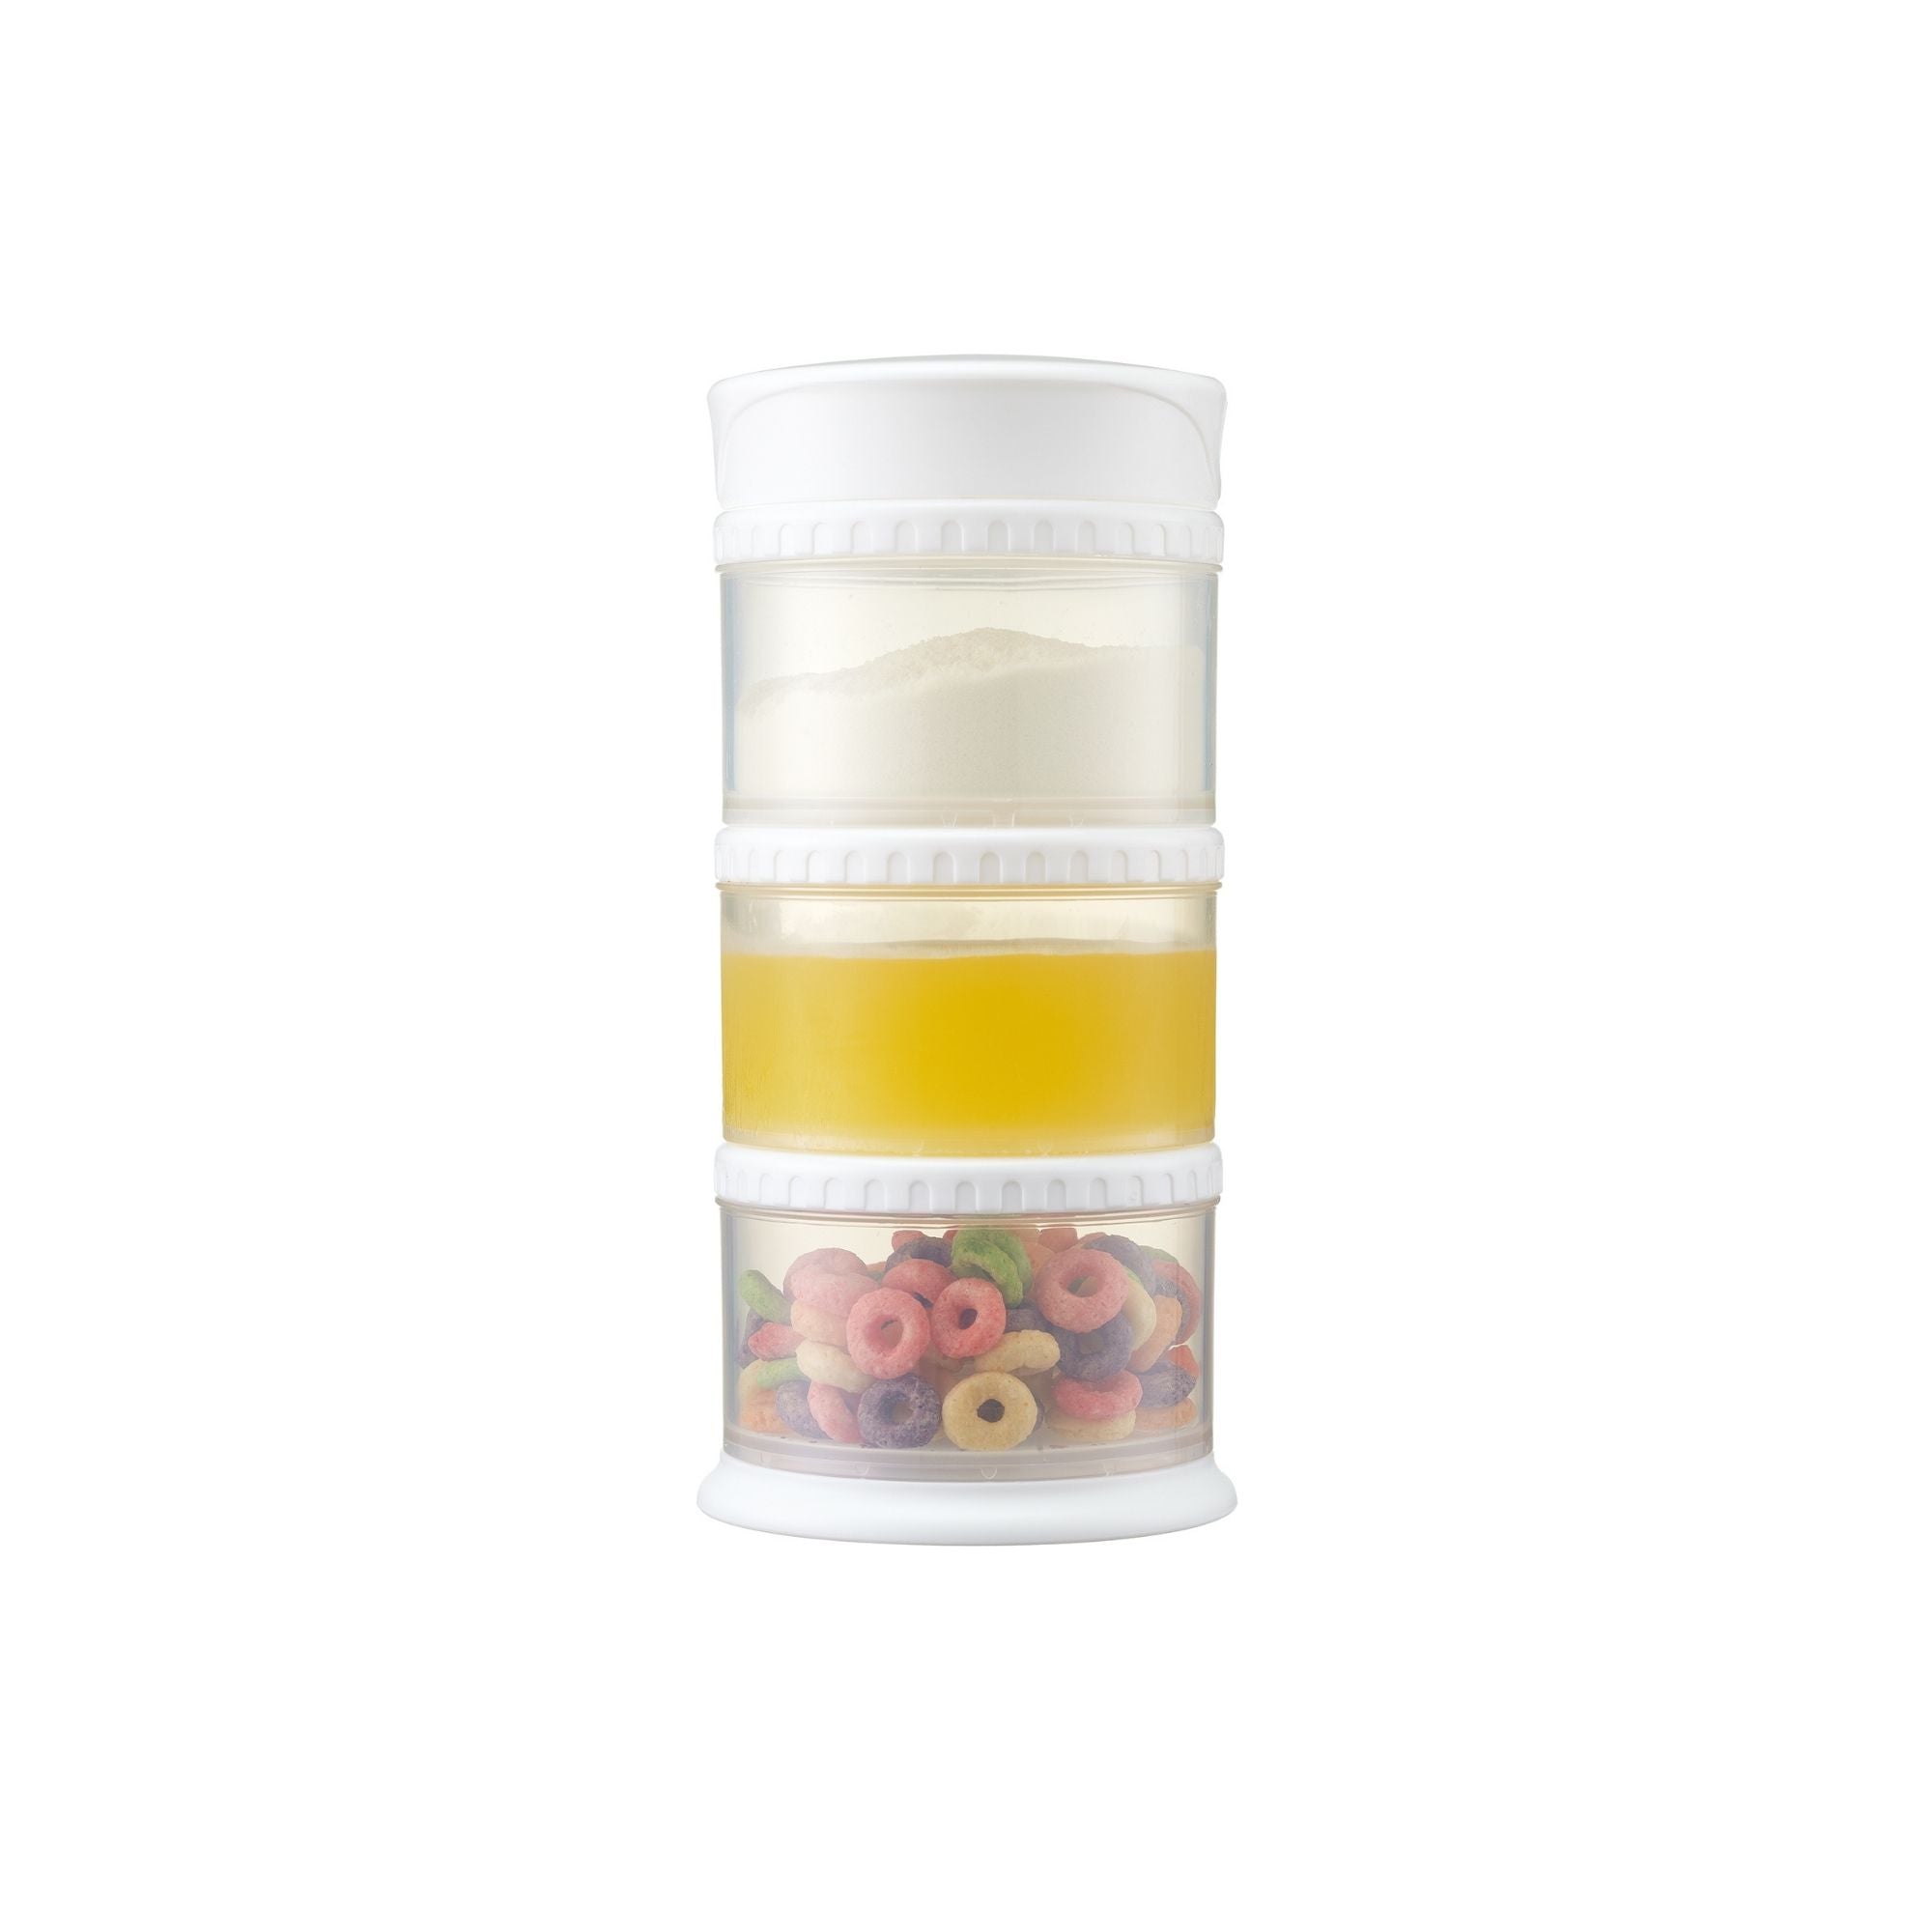 Stackable Snack Pack Containers